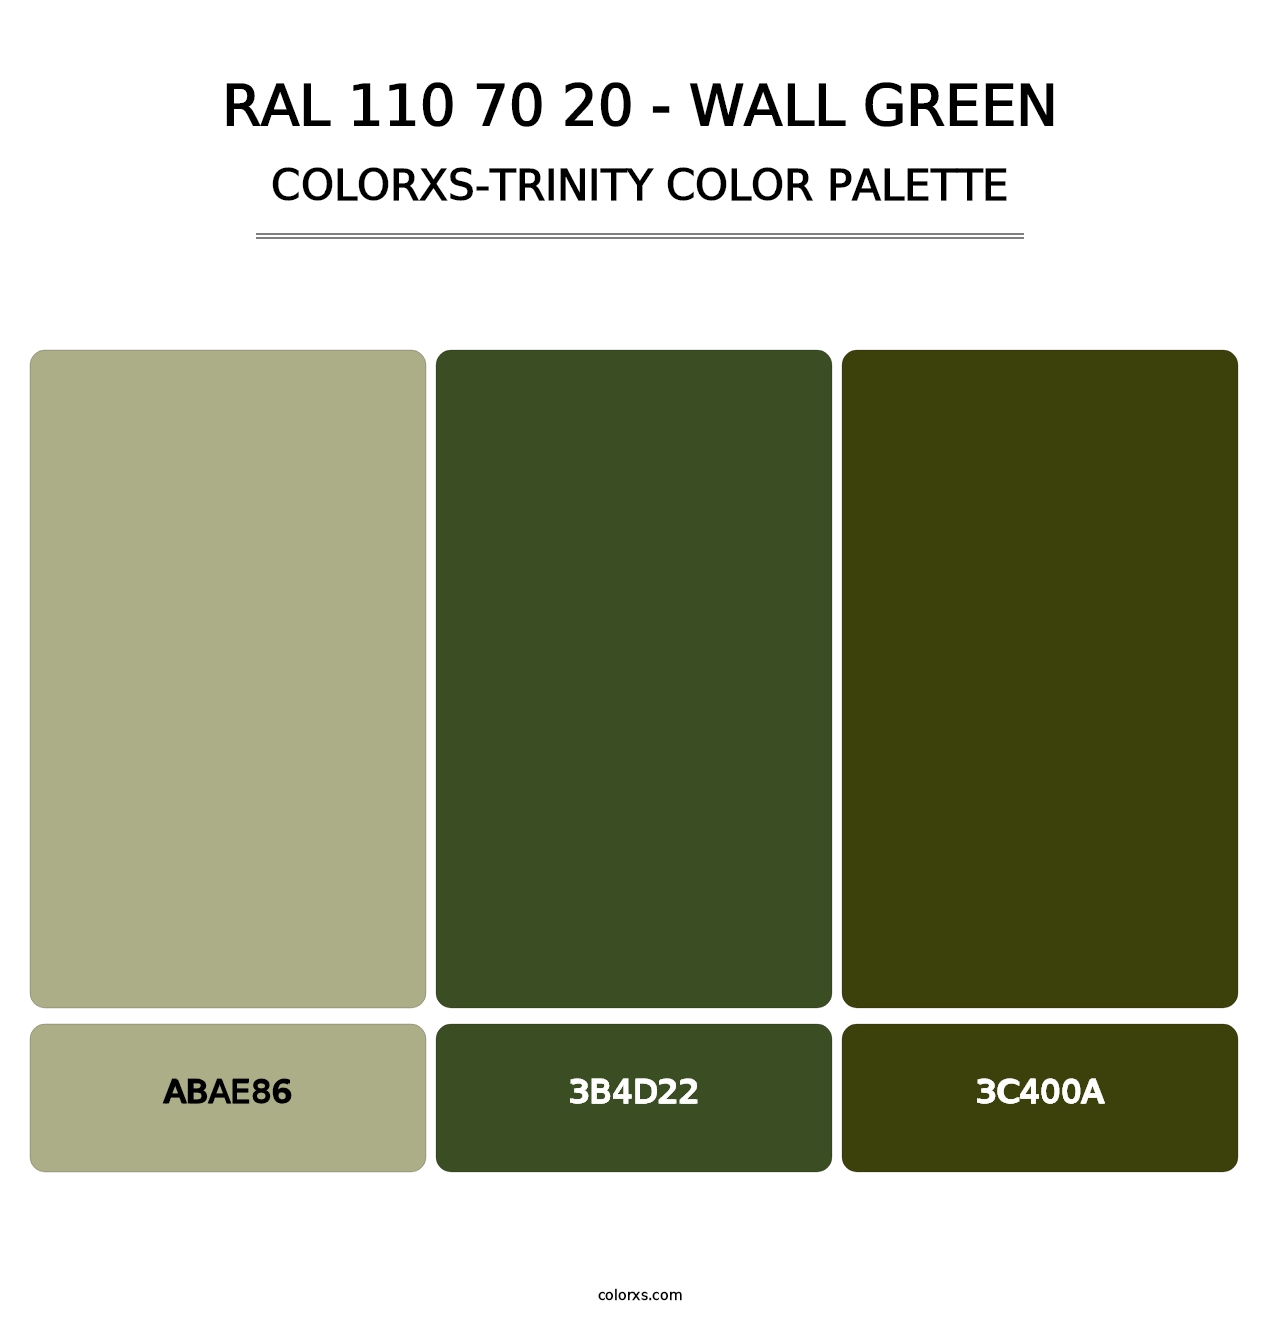 RAL 110 70 20 - Wall Green - Colorxs Trinity Palette